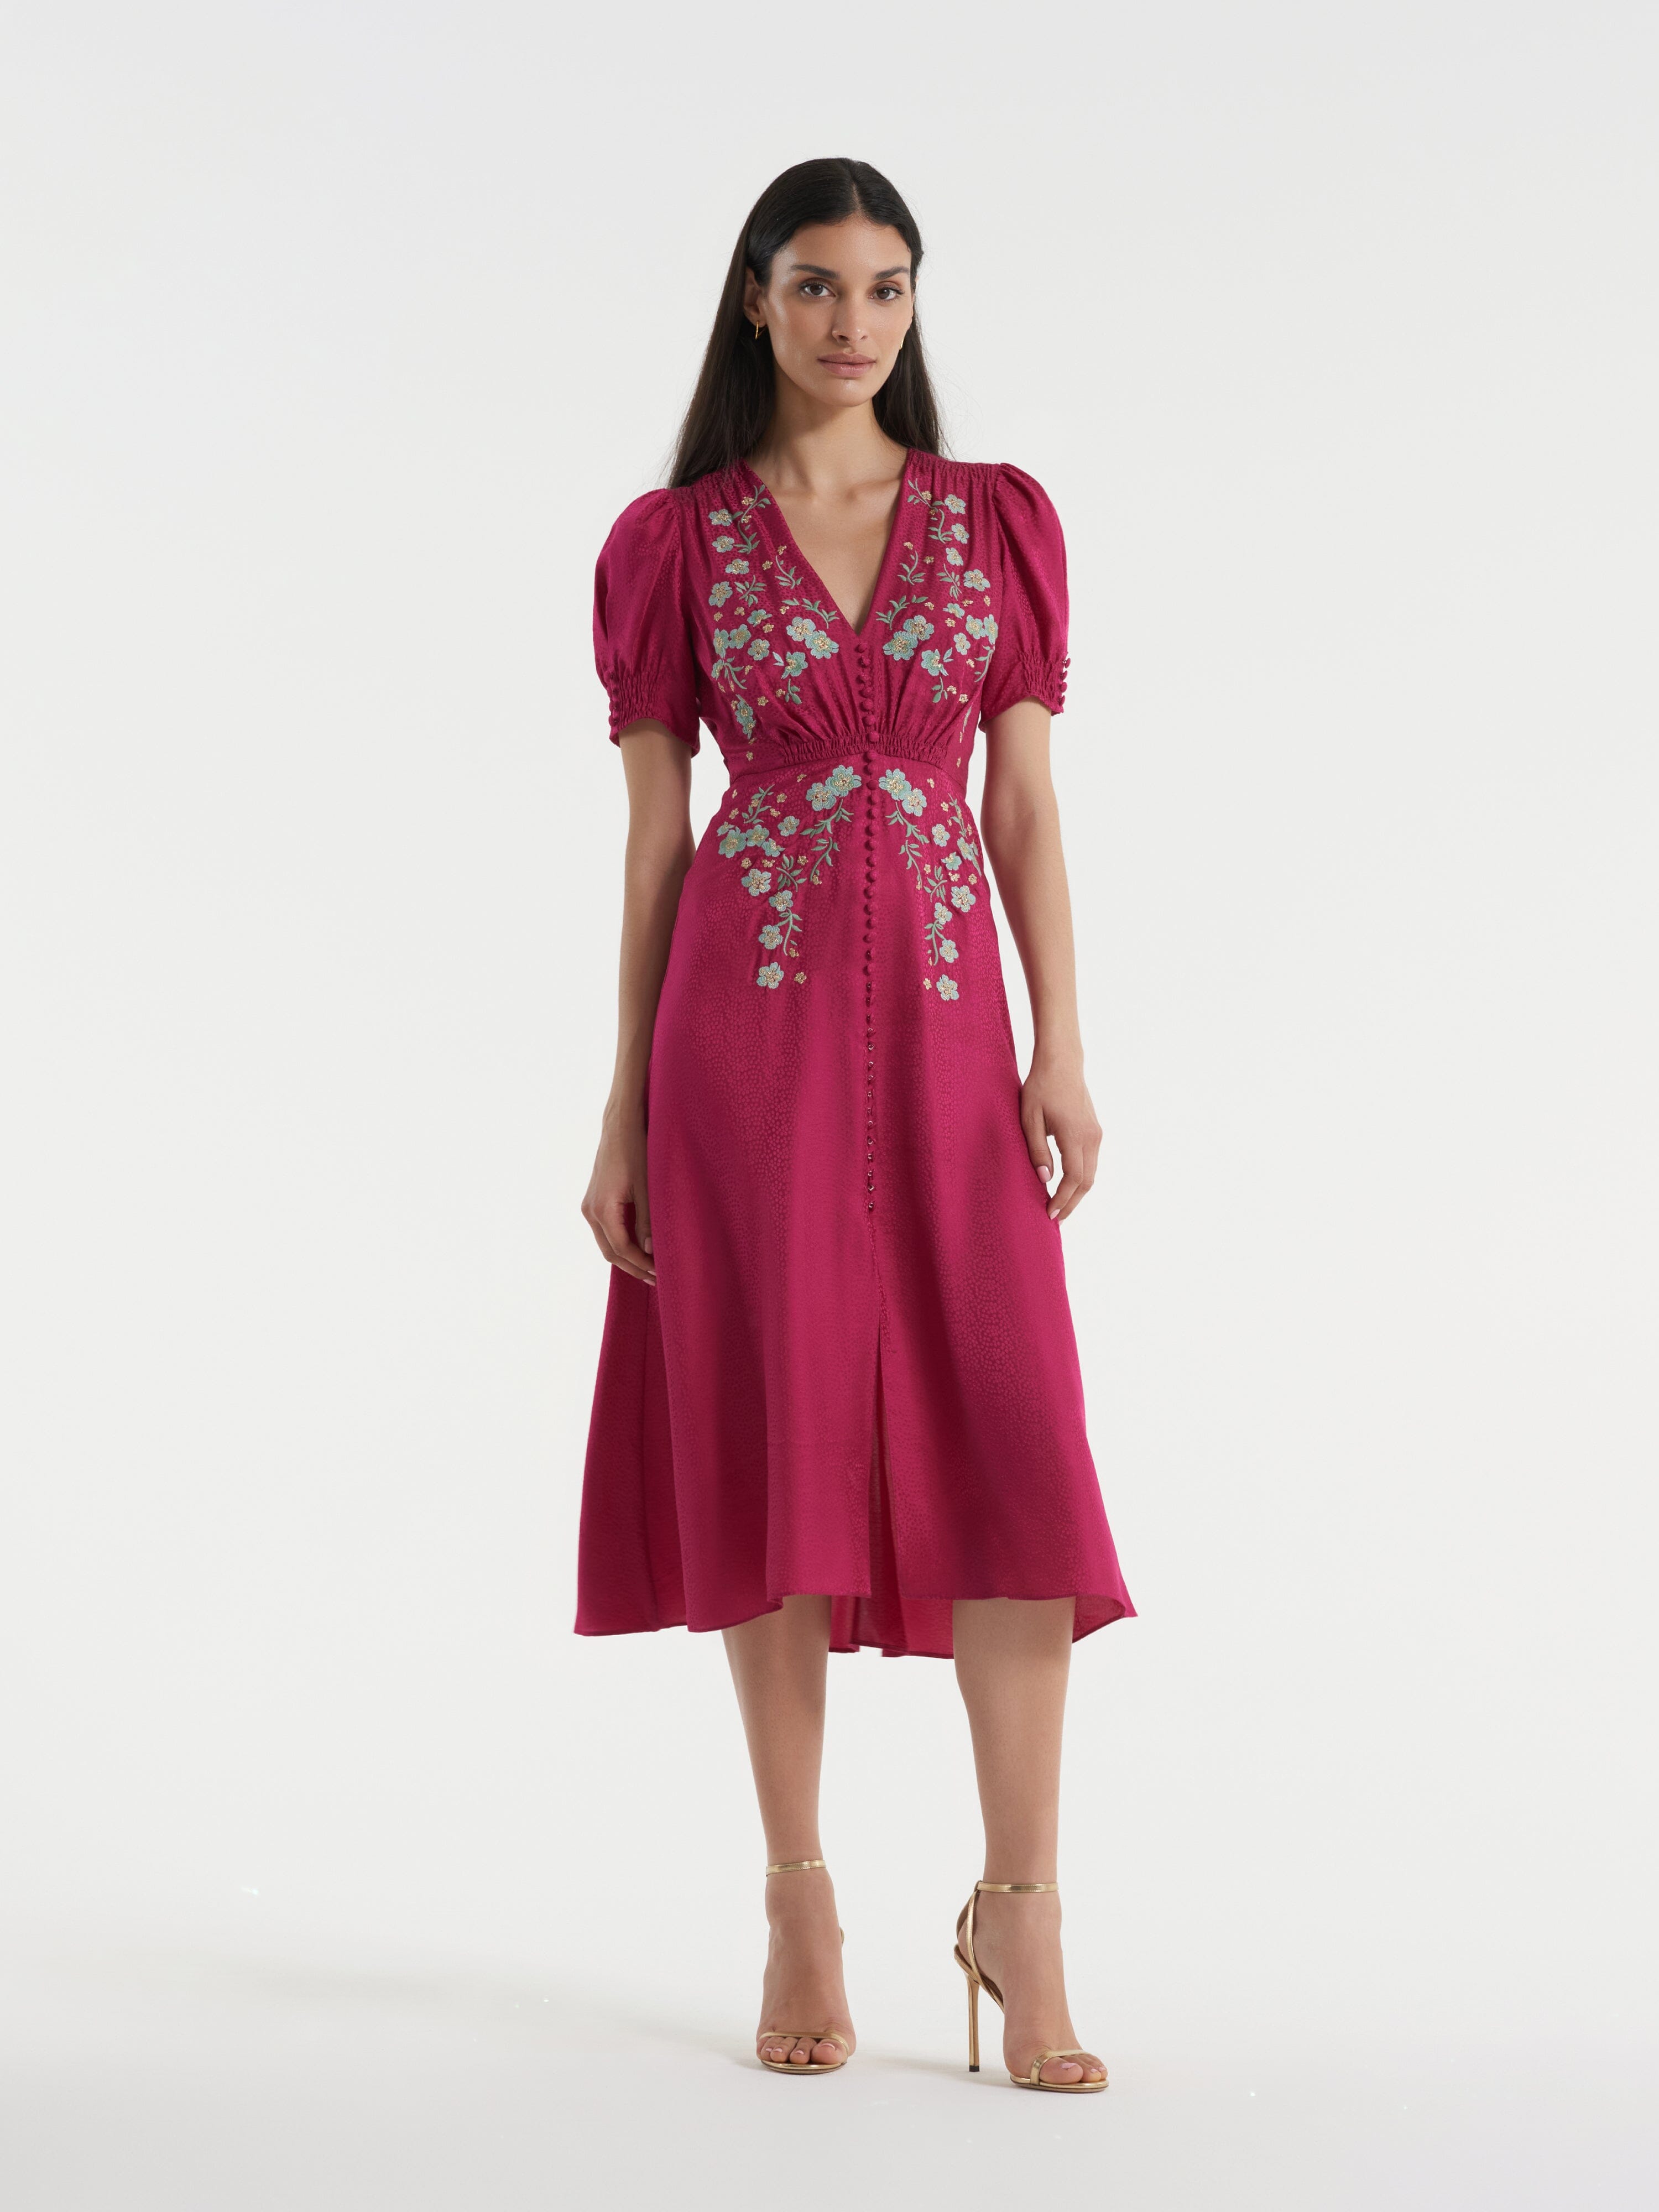 Lea Dress in Summerberry Jade Embroidered